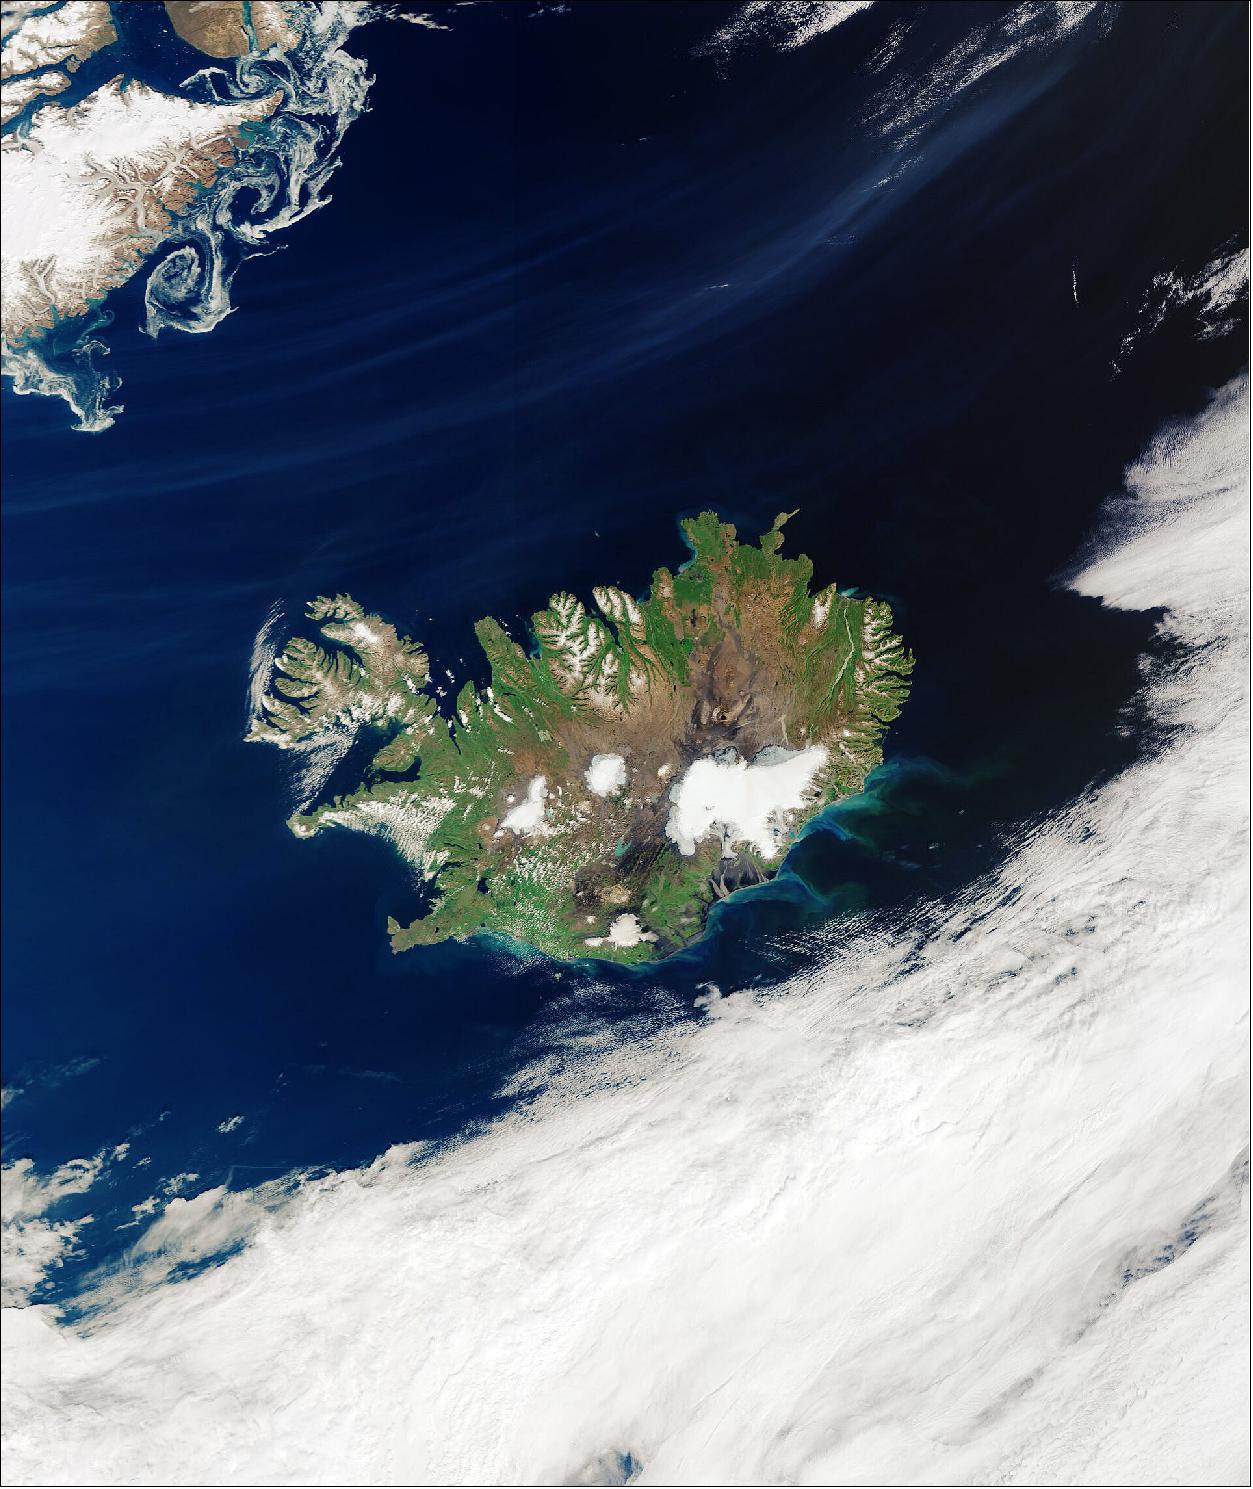 Figure 48: Cloud-free Iceland. The large, white area visible on the island is a national park that encompasses the Vatnajökull Glacier. Covering an area of around 8400 km2 with an average ice thickness of more than 900 m, Vatnajökull is not only classified as the biggest glacier in Iceland, but the biggest in Europe. The white, circular patch in the center of the country is Hofsjökull, the country’s third largest glacier and its largest active volcano. The elongated white area west of Hofsjökull is Langjökull, Iceland’s second largest ice cap. Reykjavík, the capital and largest city of Iceland, is located on the Seltjarnarnes Peninsula, in southwest Iceland. In the top-left of the image, several sea ice swirls can be seen off the coast of Greenland (image credit: ESA, the image contains modified Copernicus Sentinel data (2020), processed by ESA, CC BY-SA 3.0 IGO)